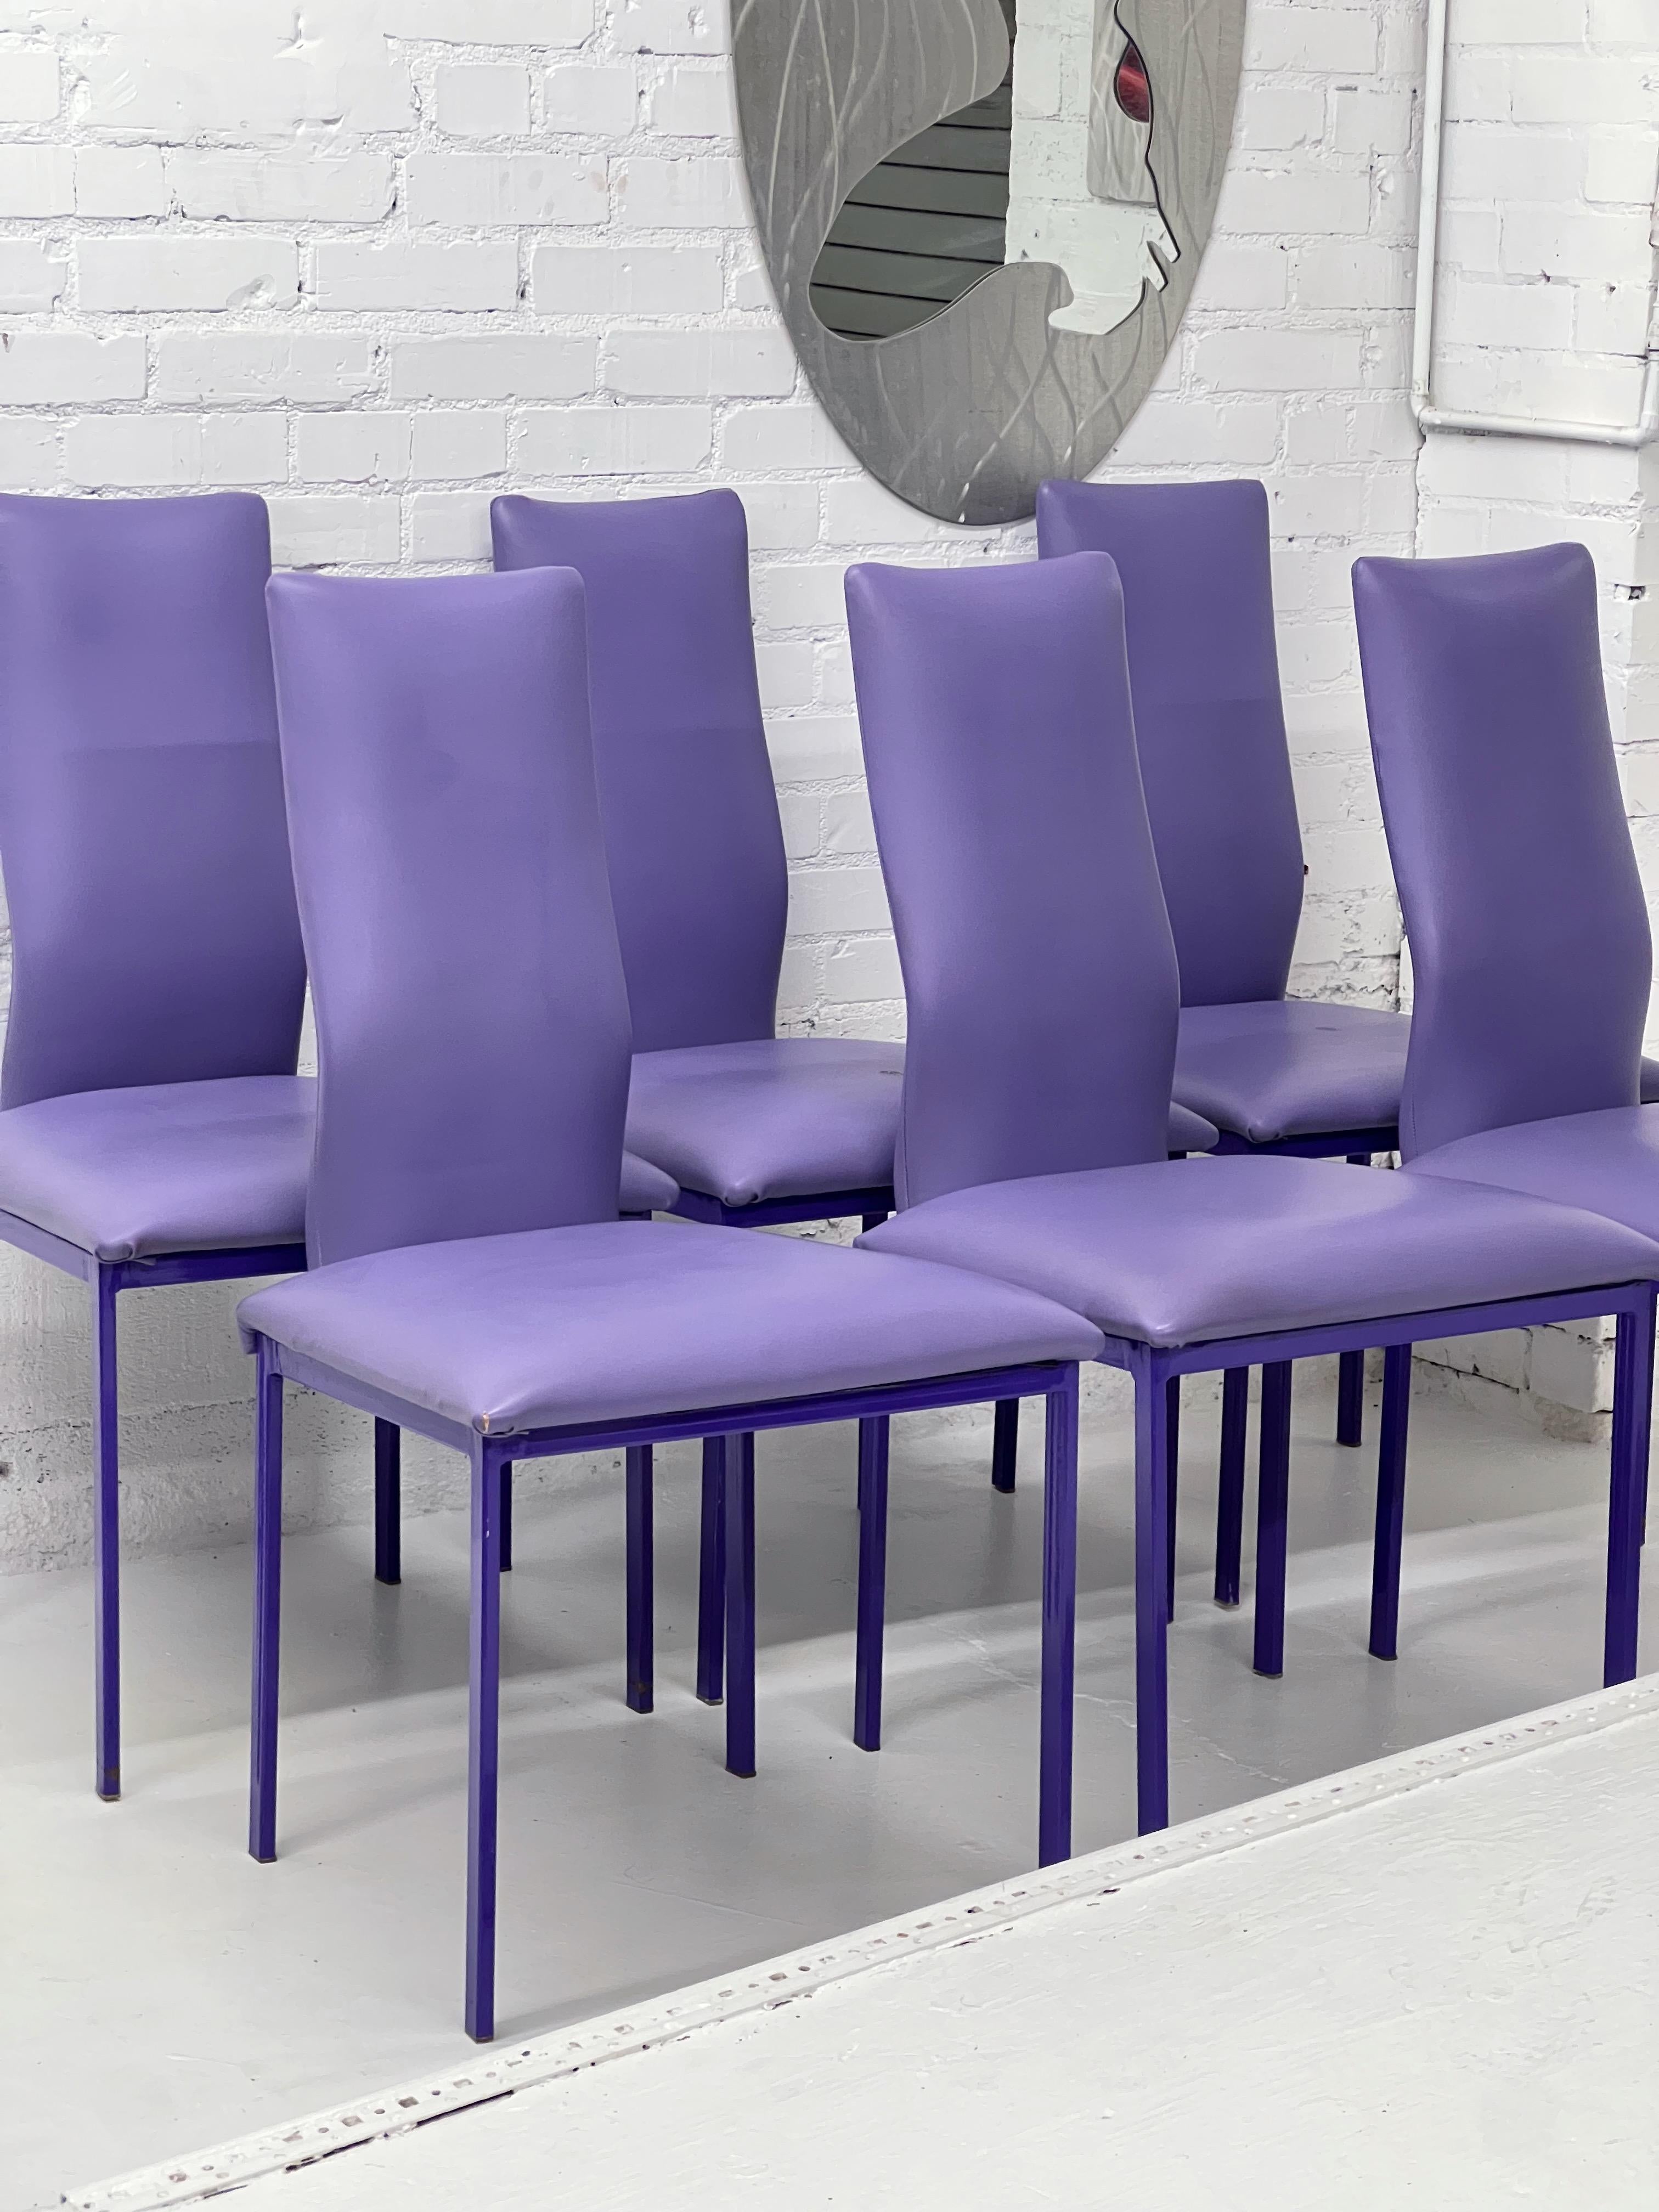 Minson Corp. Post Modern Lavender Sculpted Dining Chairs - Set of 6. Featuring metal frames, lavender upholstered back and seat, original label, curvaceous lines, great style and form.

Metal frames have some minor chipping on the color, upholstery